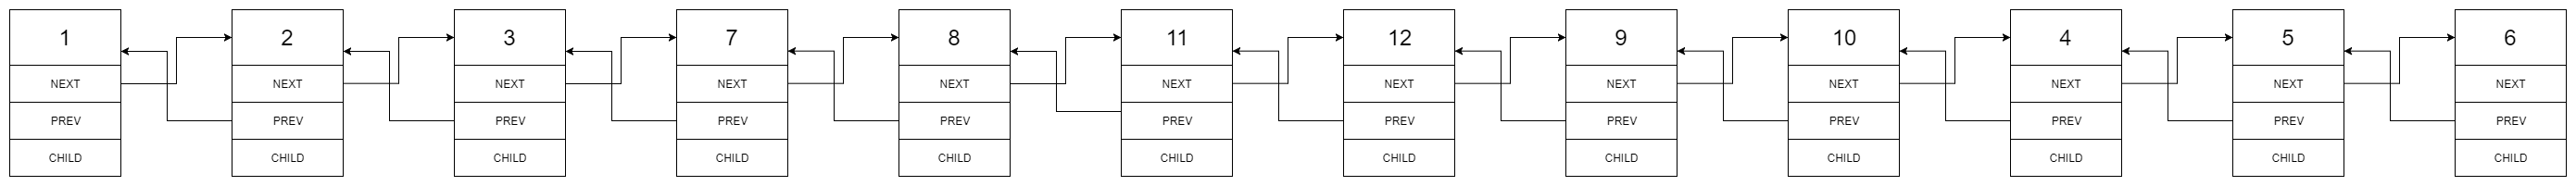 flattened multi level linked list example 1.png